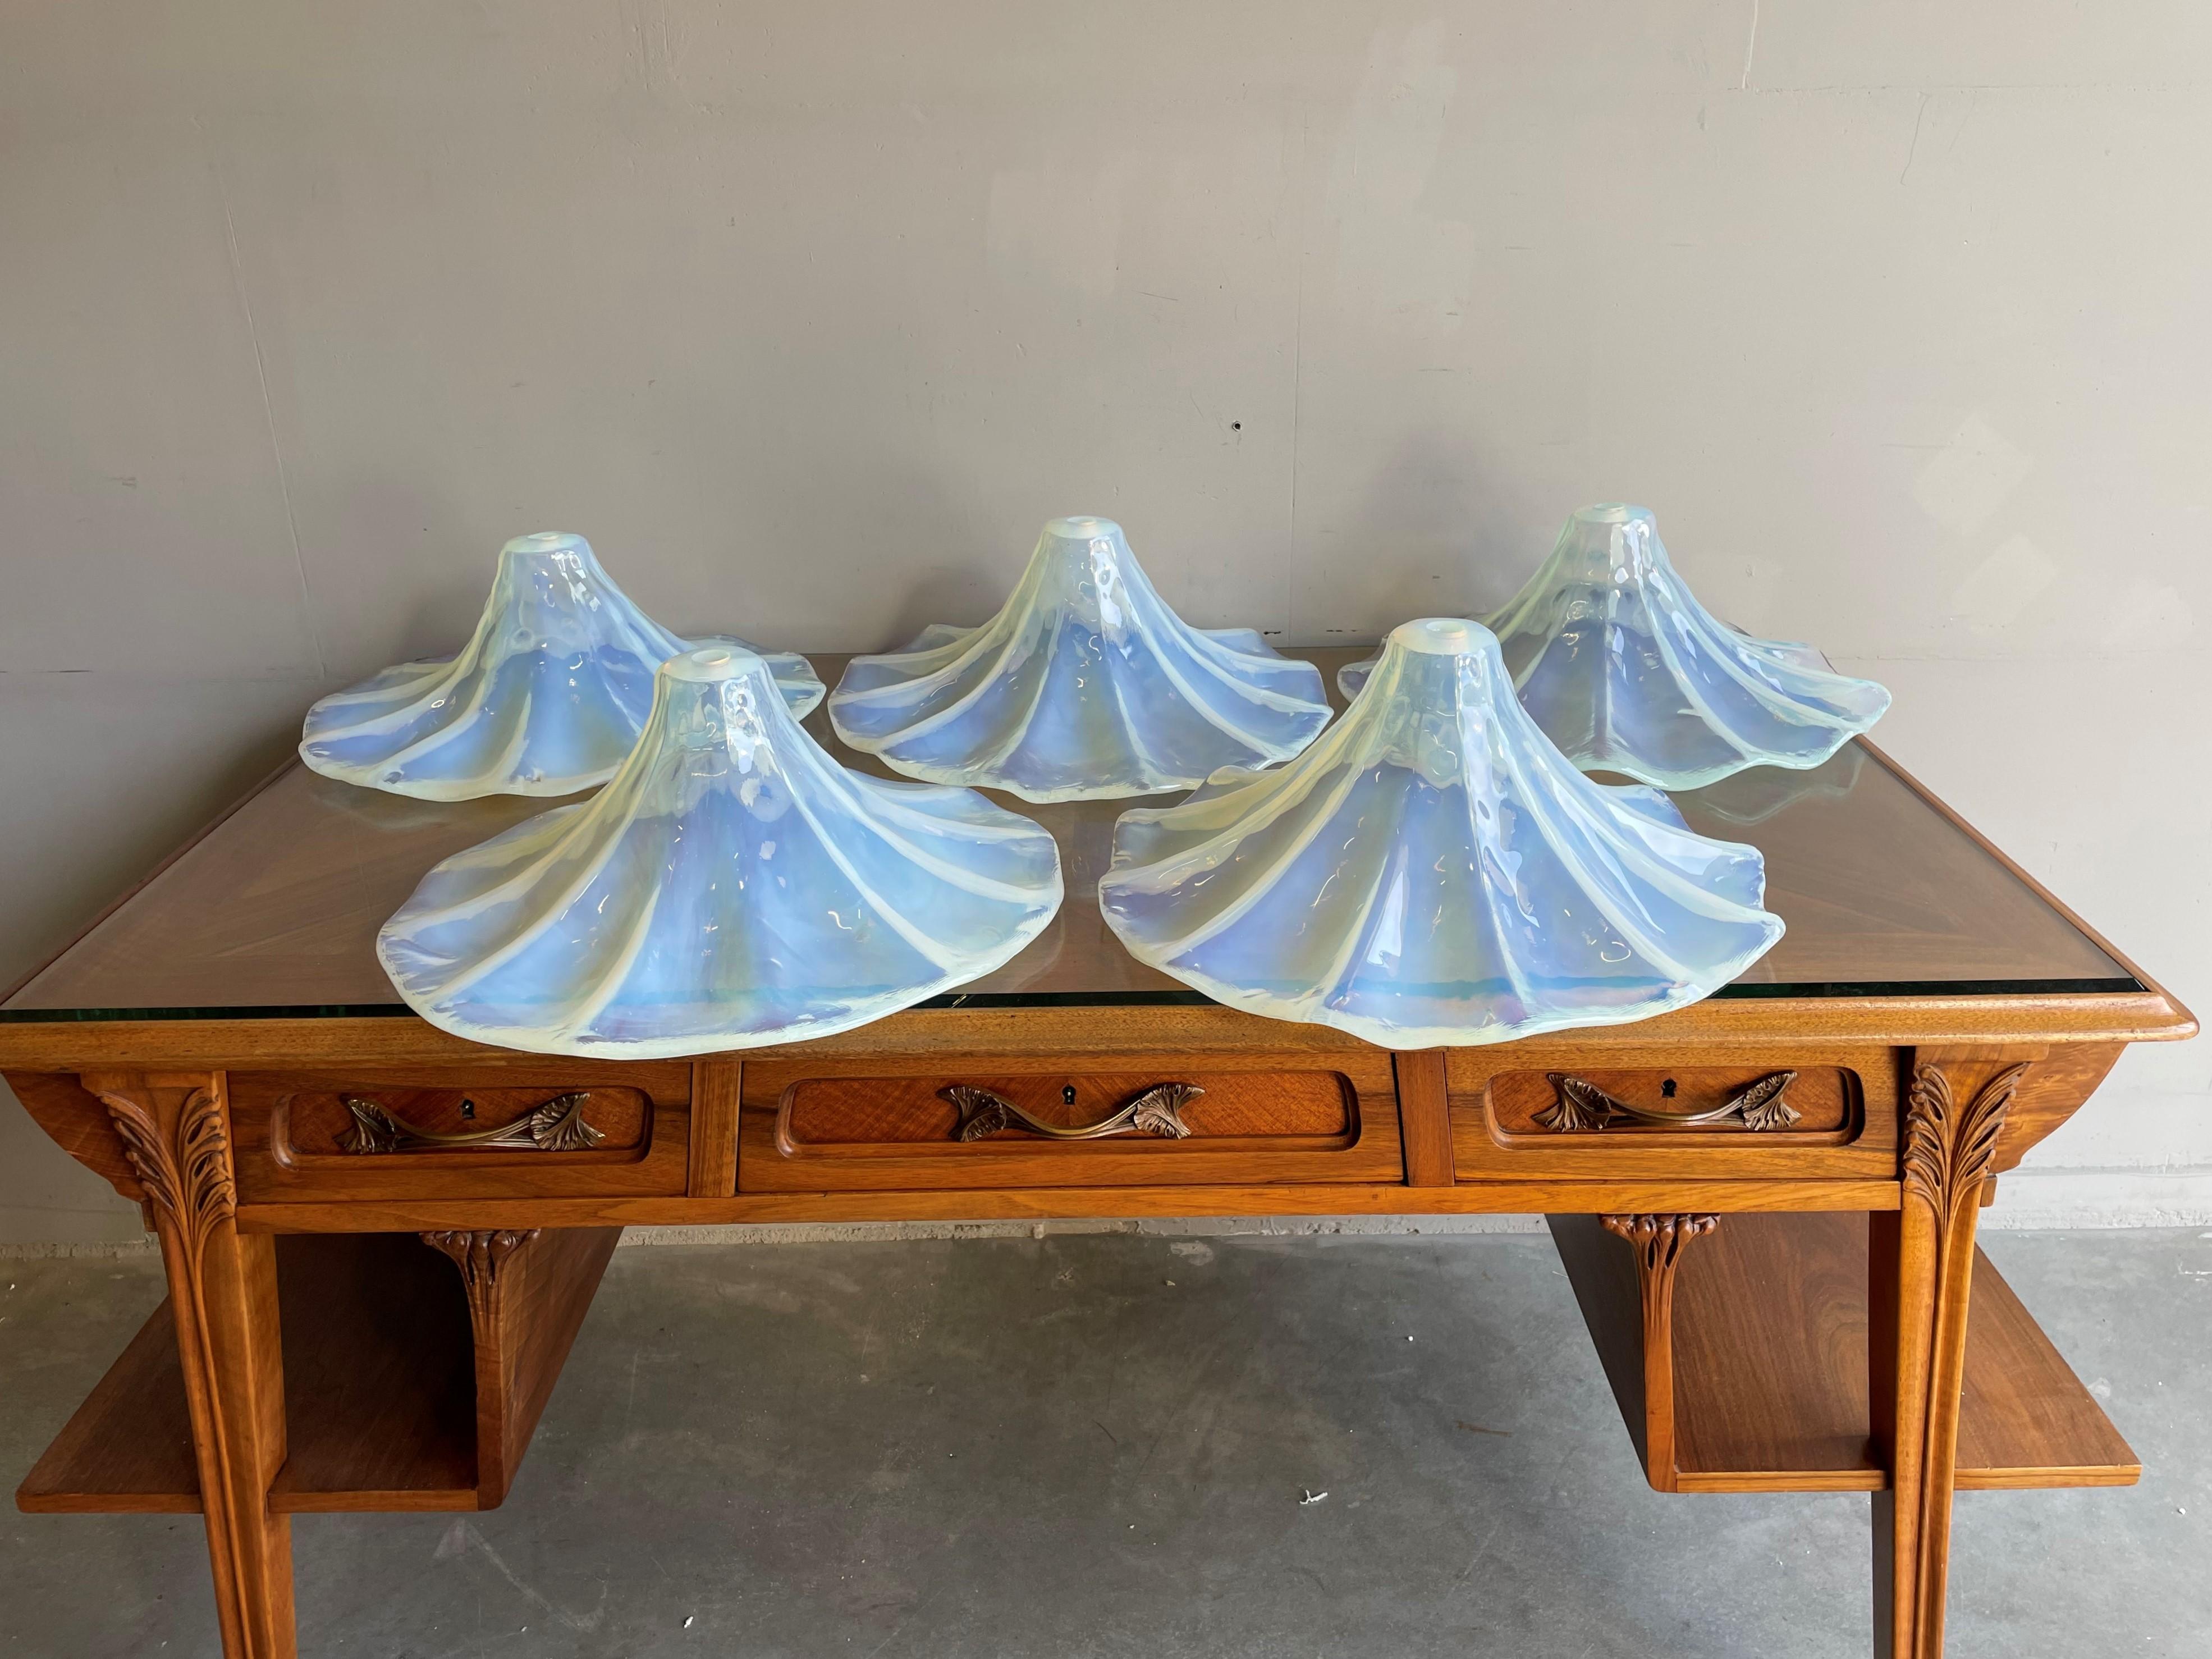 Good size and great shape group of five / 5 midcentury pendant shades.

About eight years ago we purchased this amazing design and superb condition set of five midcentury, art glass shades from the man who said he had salvaged them from a